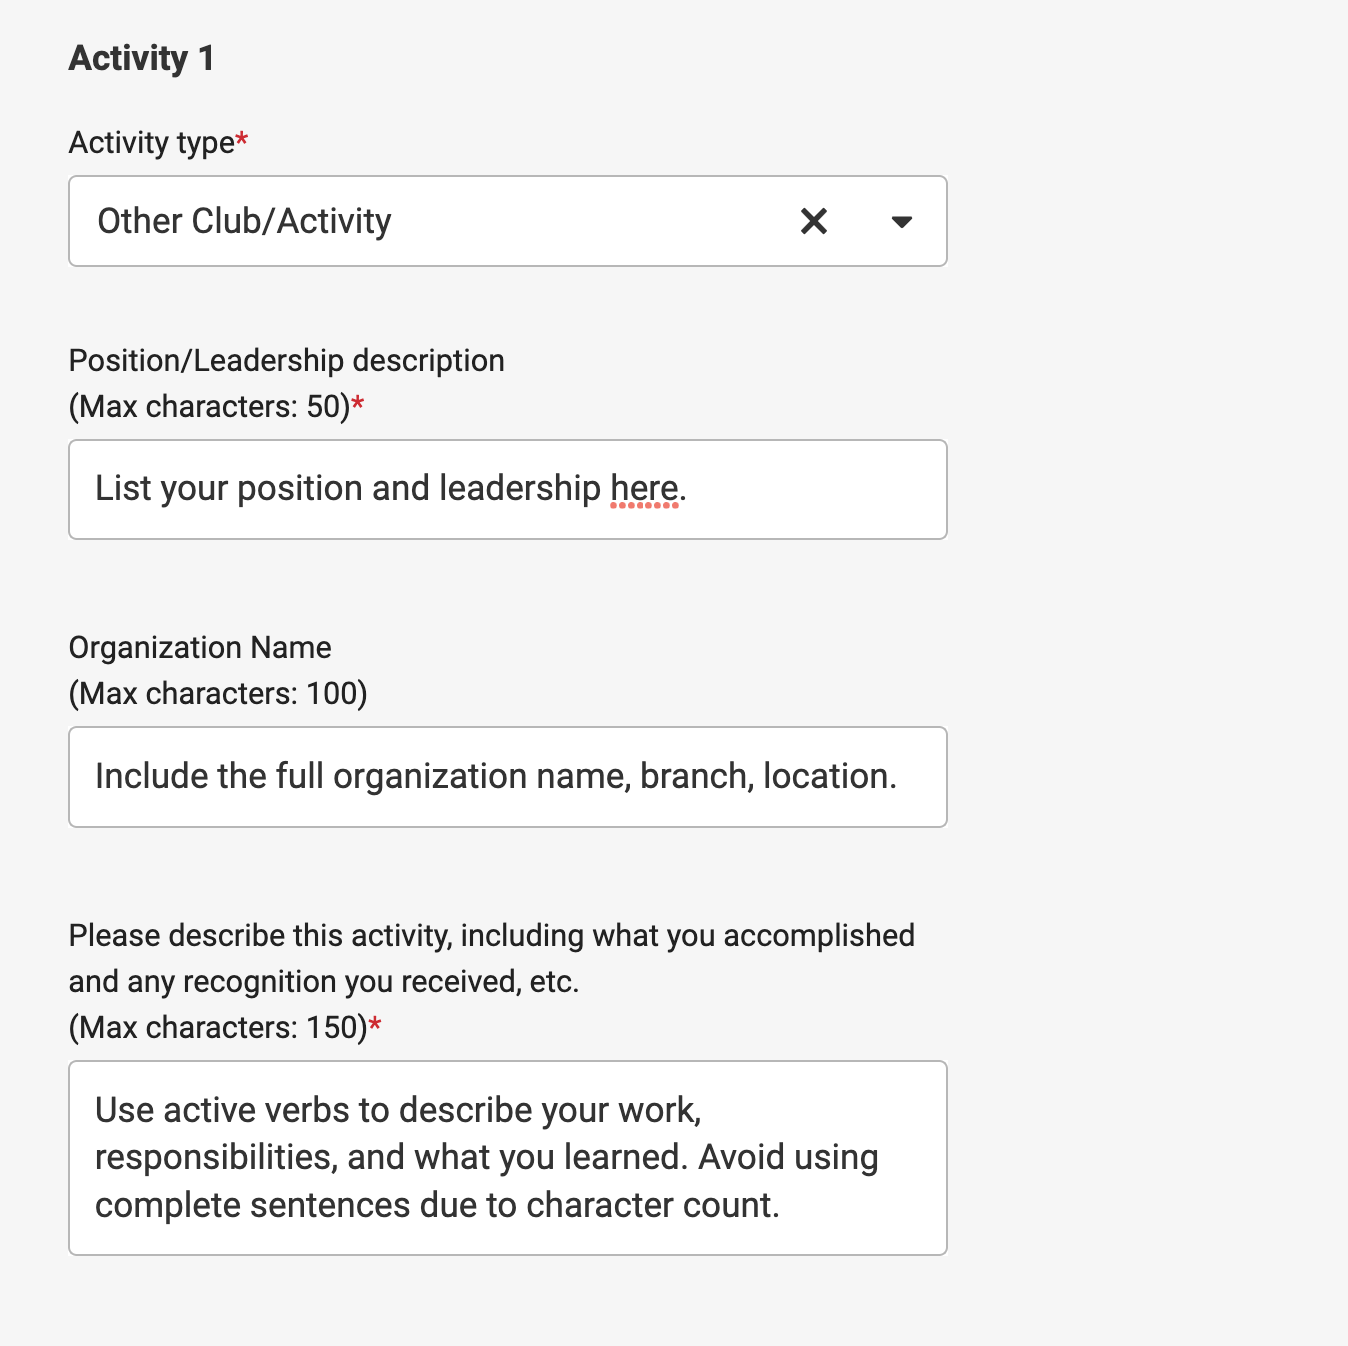 Example of completing the activity section with "Other Club/Activity." Position/Leadership field: List your position and leadership here. Organization Name field: Include the full organization name, branch, location. Describe this activity field: Use active verbs and what you learned, avoid complete sentences.